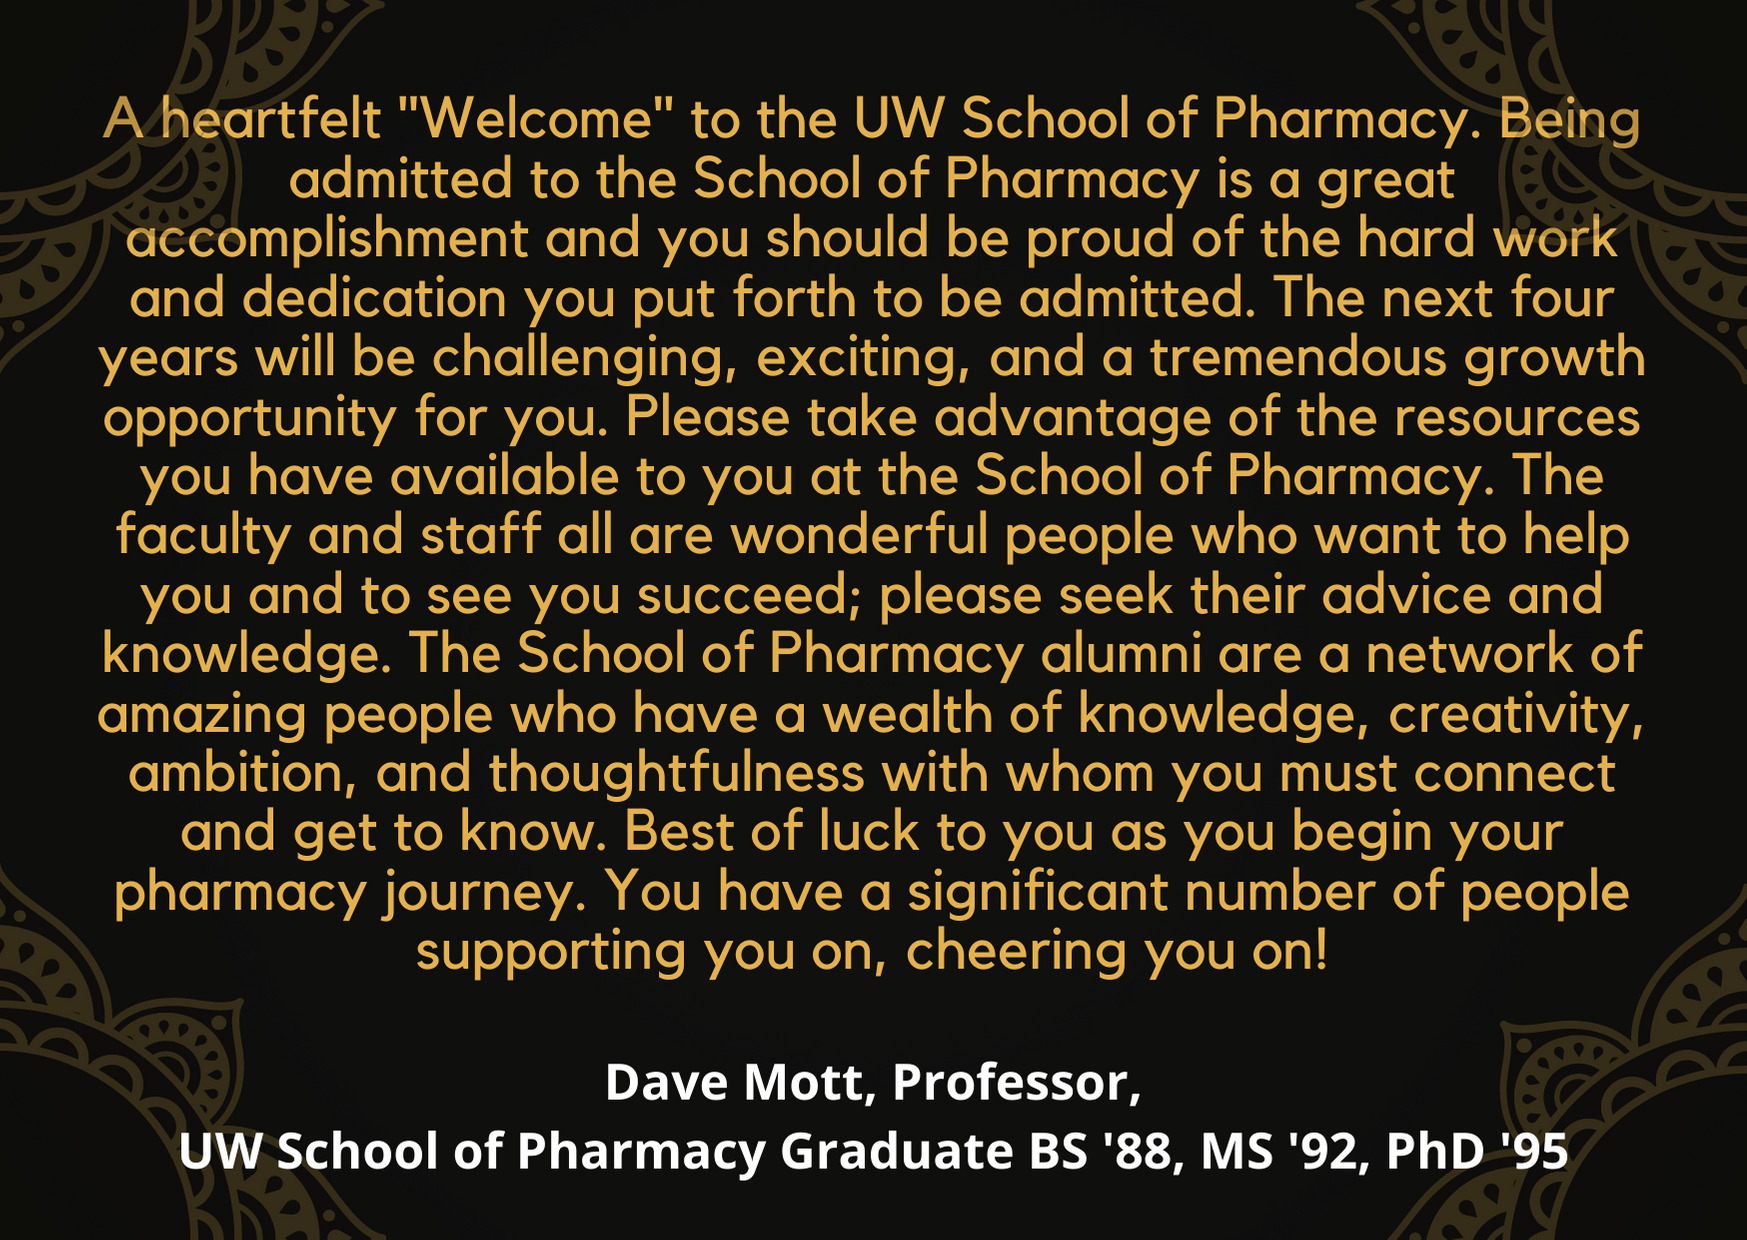 Quote from Dave Mott at the White Coat ceremony: A heartfelt 'Welcome' to the UW School of Pharmacy. Being admitted to the School of Pharmacy is a great accomplishment and you should be proud of the hard work and dedication you put forth to be admitted. The next four years will be challenging, exciting, and a tremendous growth opportunity for you. Please take advantage of the resources you have available to you at the School of Pharmacy. The faculty and staff all are wonderful people who want to help you and to see you succeed; please seek their advice and knowledge. The School of Pharmacy alumni are a network of amazing people who have a wealth of knowledge, creativity, ambition, and thoughtfulness with whom you must connect and get to know. Best of luck to you as you begin your pharmacy journey. You have a significant number of people supporting you on, cheering you on!